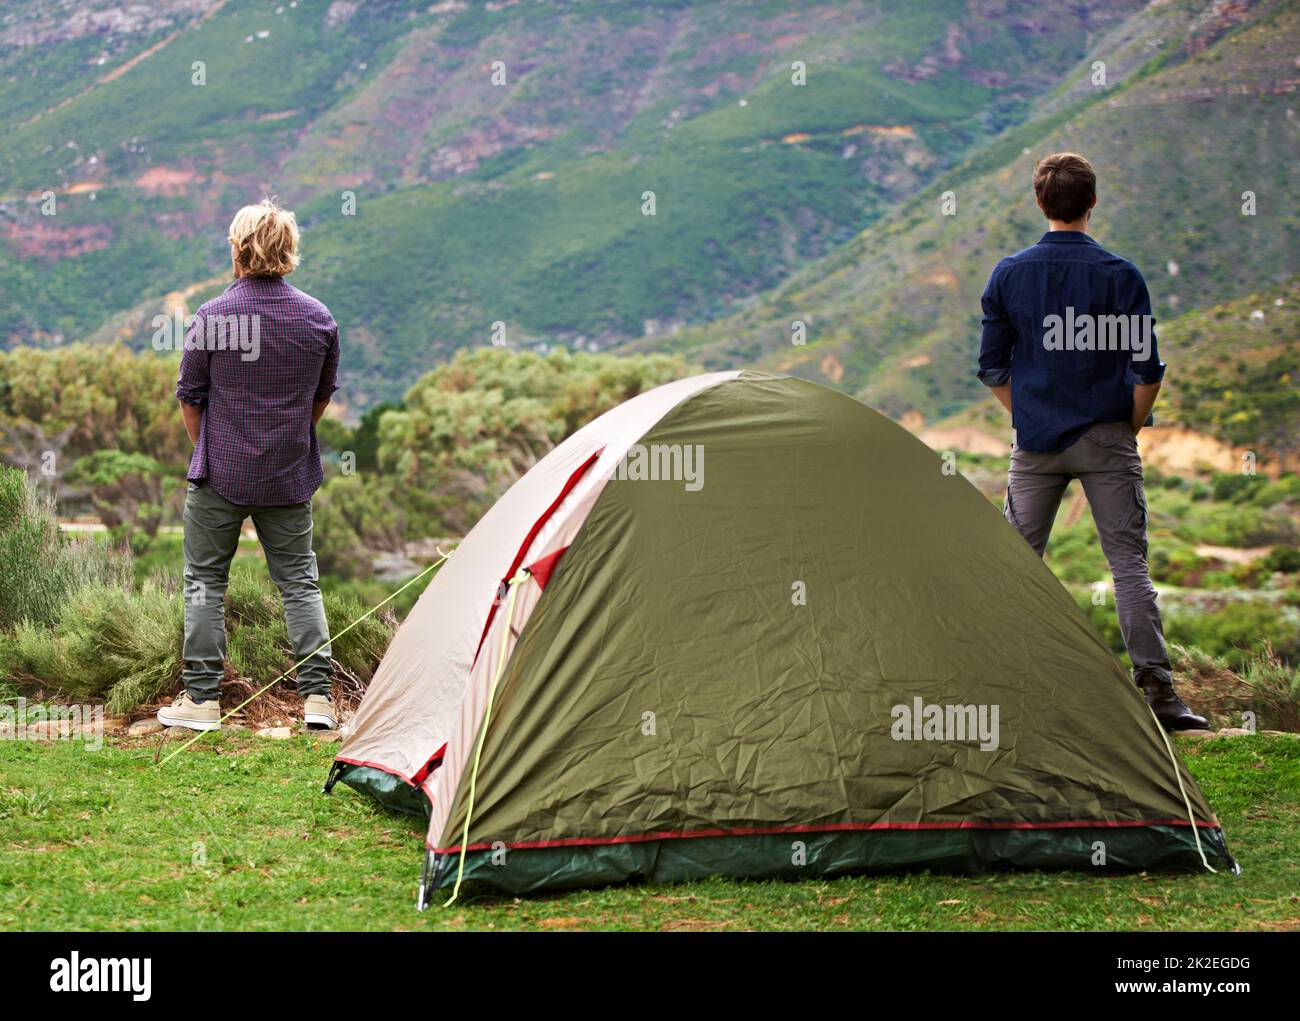 Taking in natures magnificence. Two men relaxing at their campsite. Stock Photo